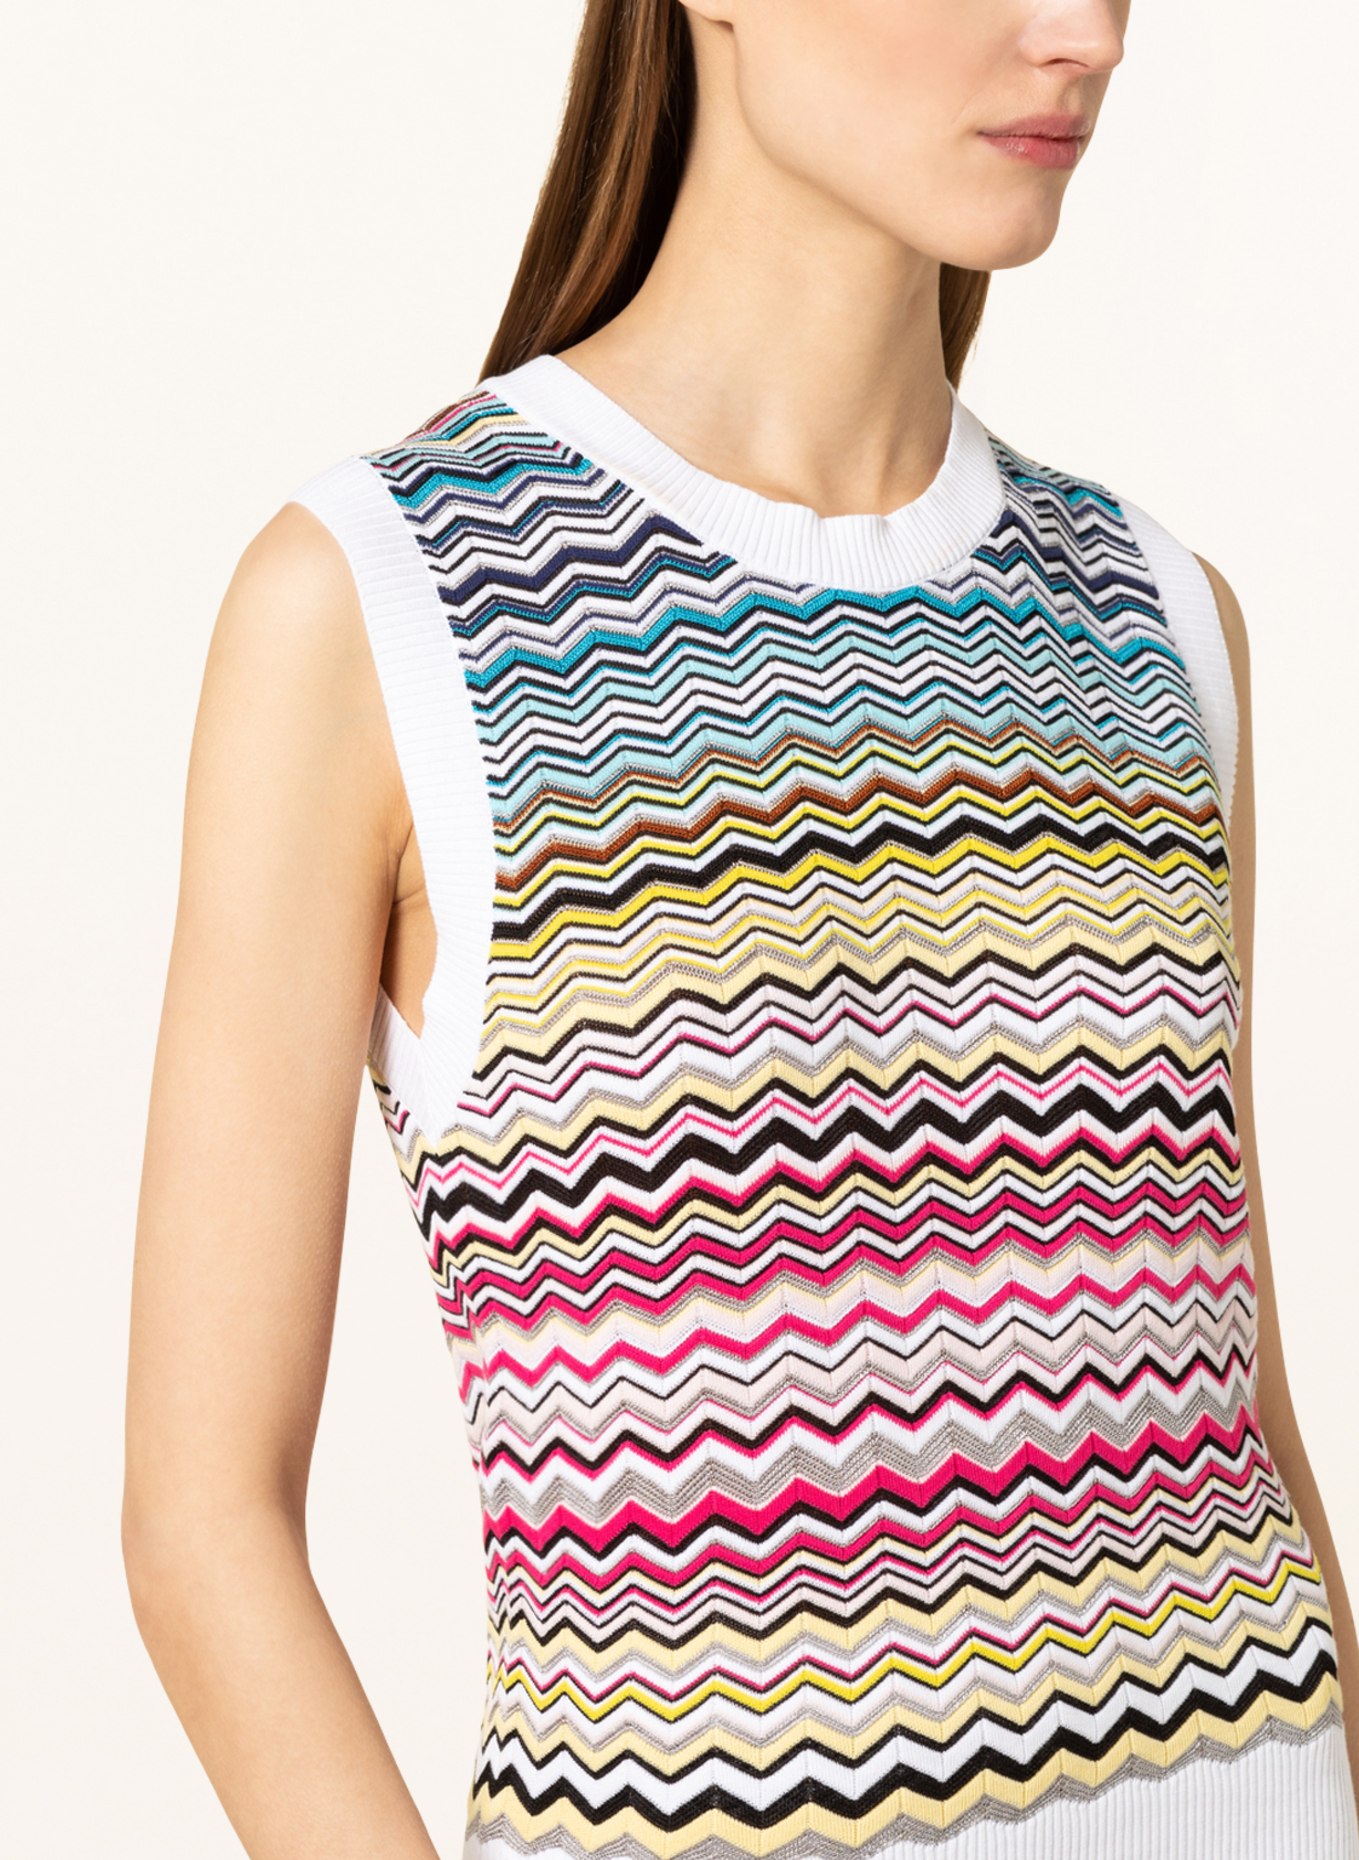 MISSONI Top, Color: BLUE/ YELLOW/ PINK (Image 4)